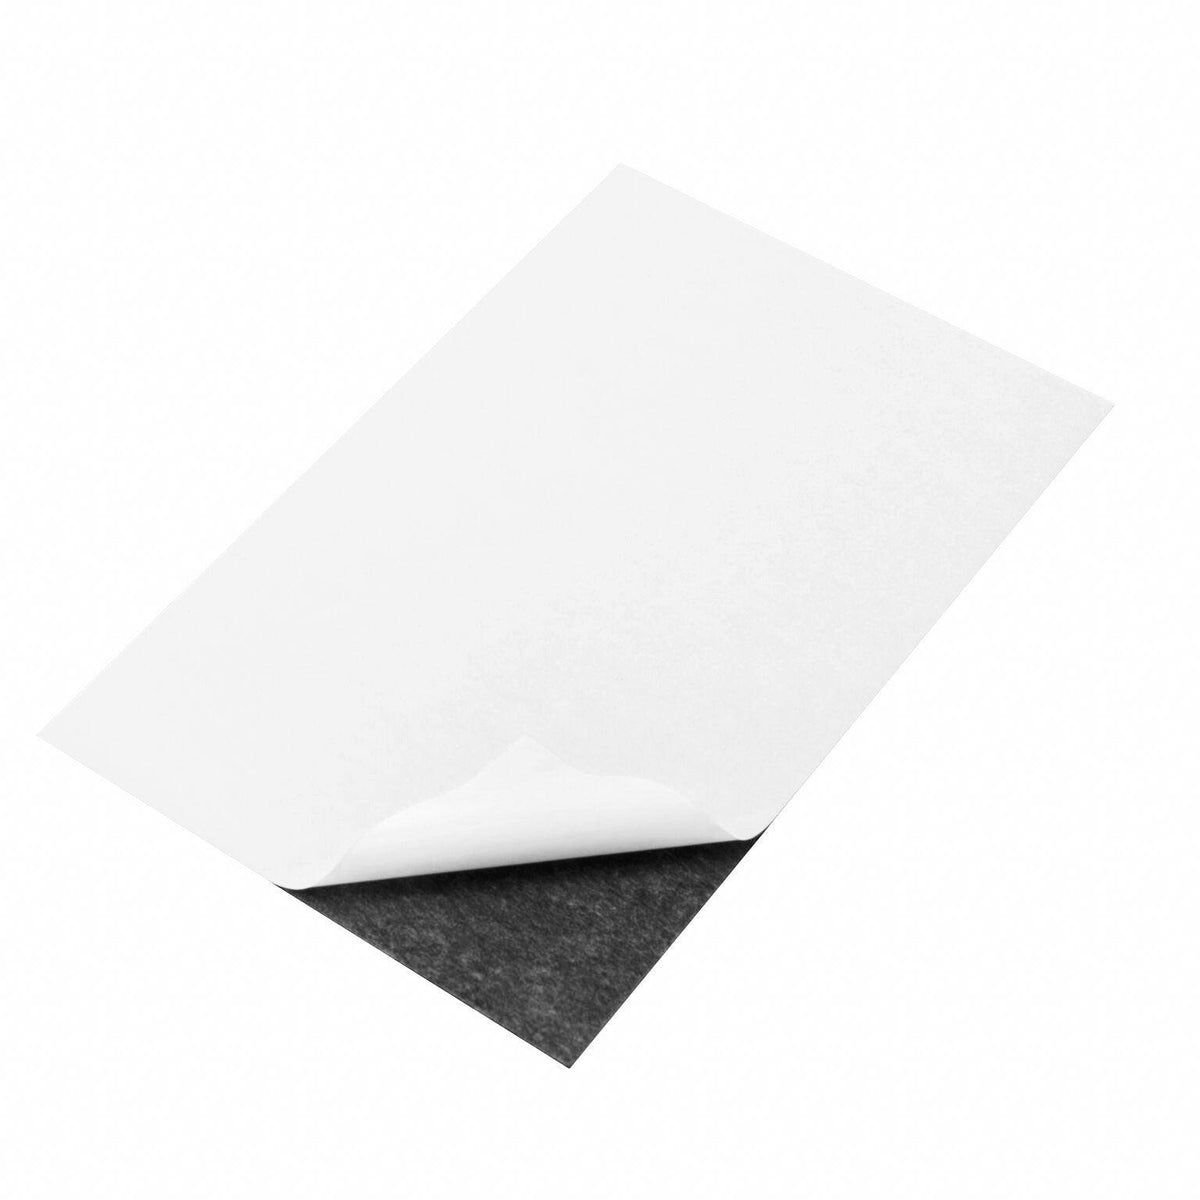 Self Adhesive Magnetic Sheets Magnetic Adhesive Sheets -Premium Quality Peel and Stick Magnets by Flexible Magnets 20 mil Make Anything a Magnet Pack of 10, 4 x 6 